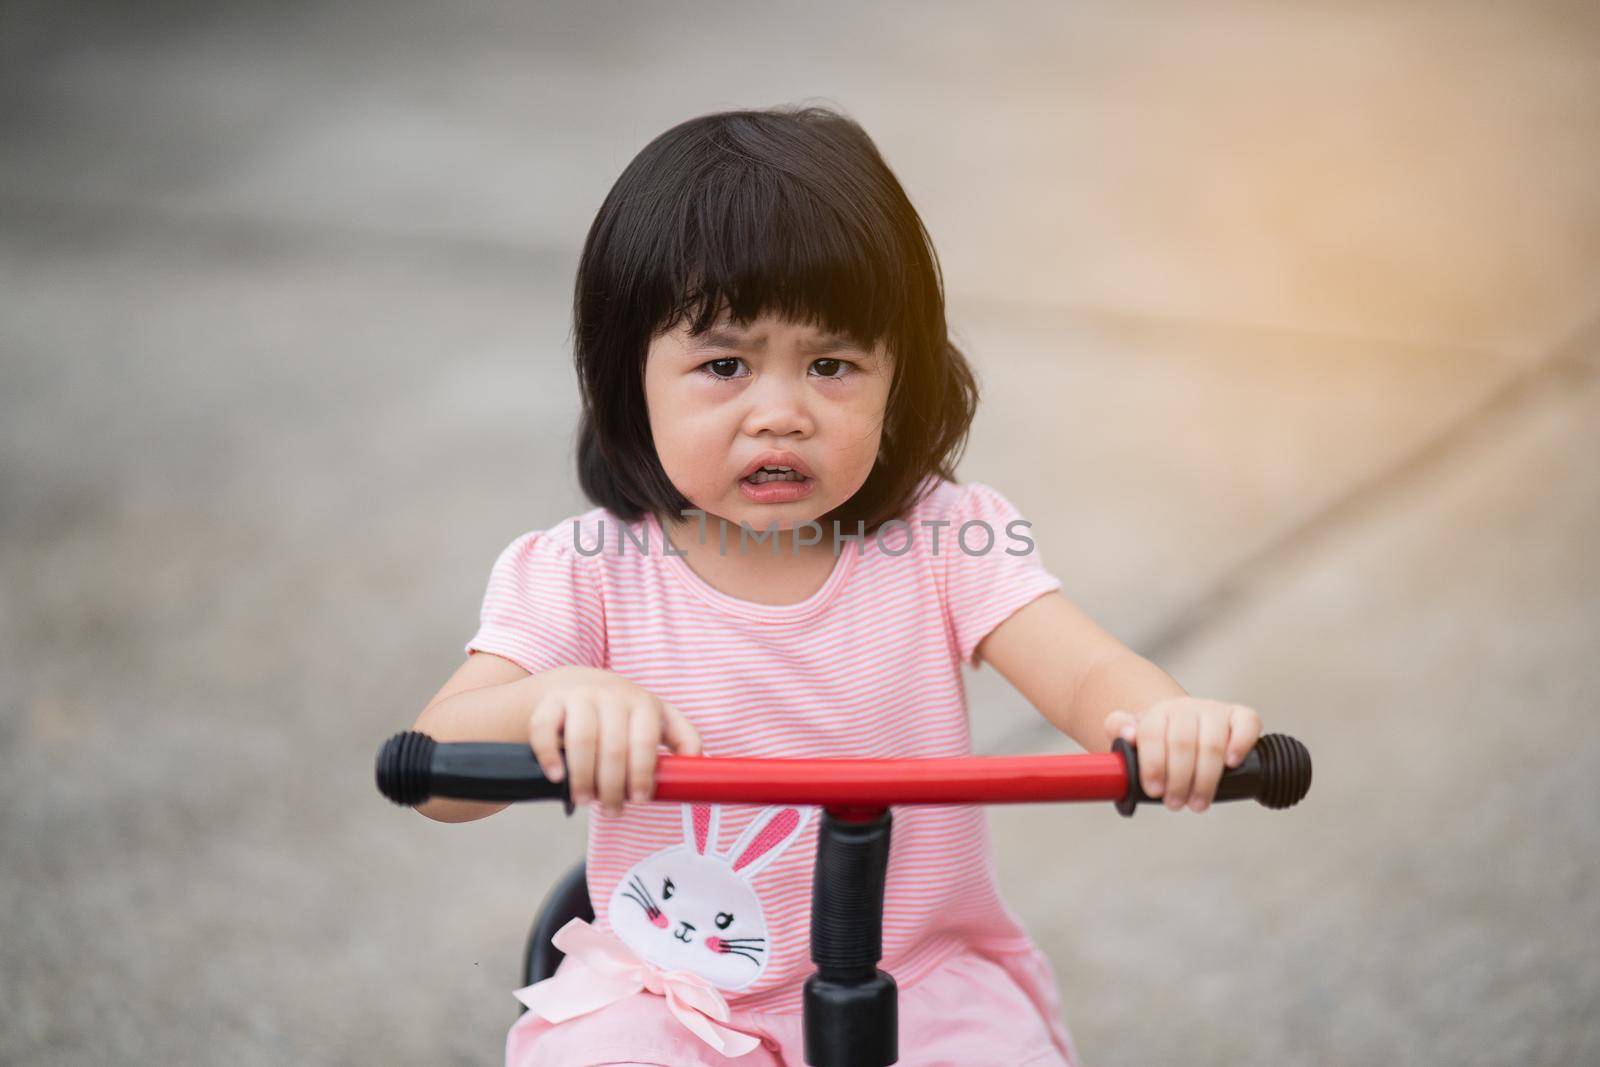 cute baby crying and riding bicycle